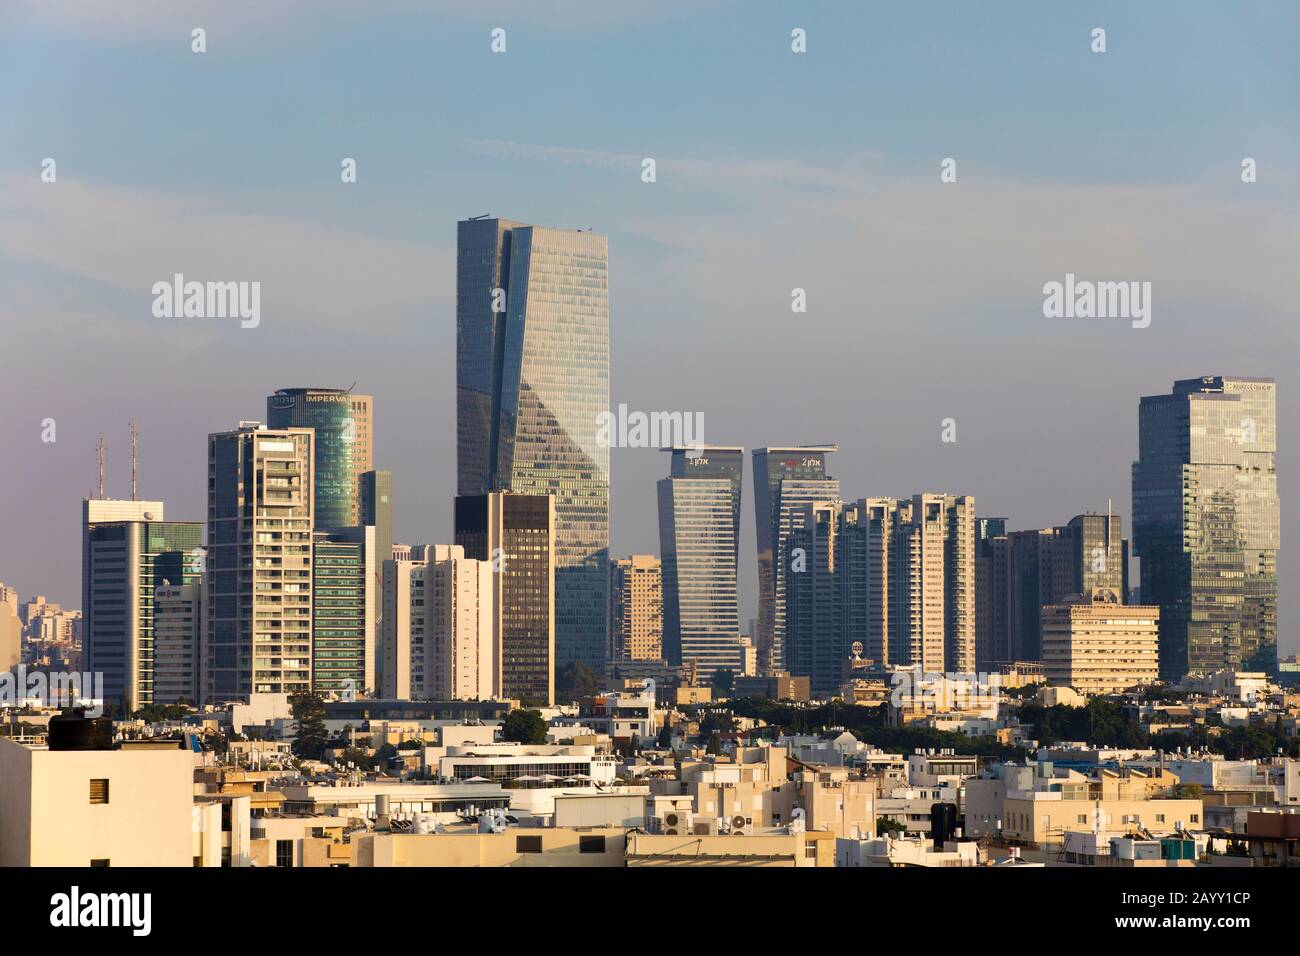 Tel Aviv, Israel skyline with the new Azrieli Sarona Tower, the tallest  building in the city, part of Israel's Silicon Wadi Stock Photo - Alamy